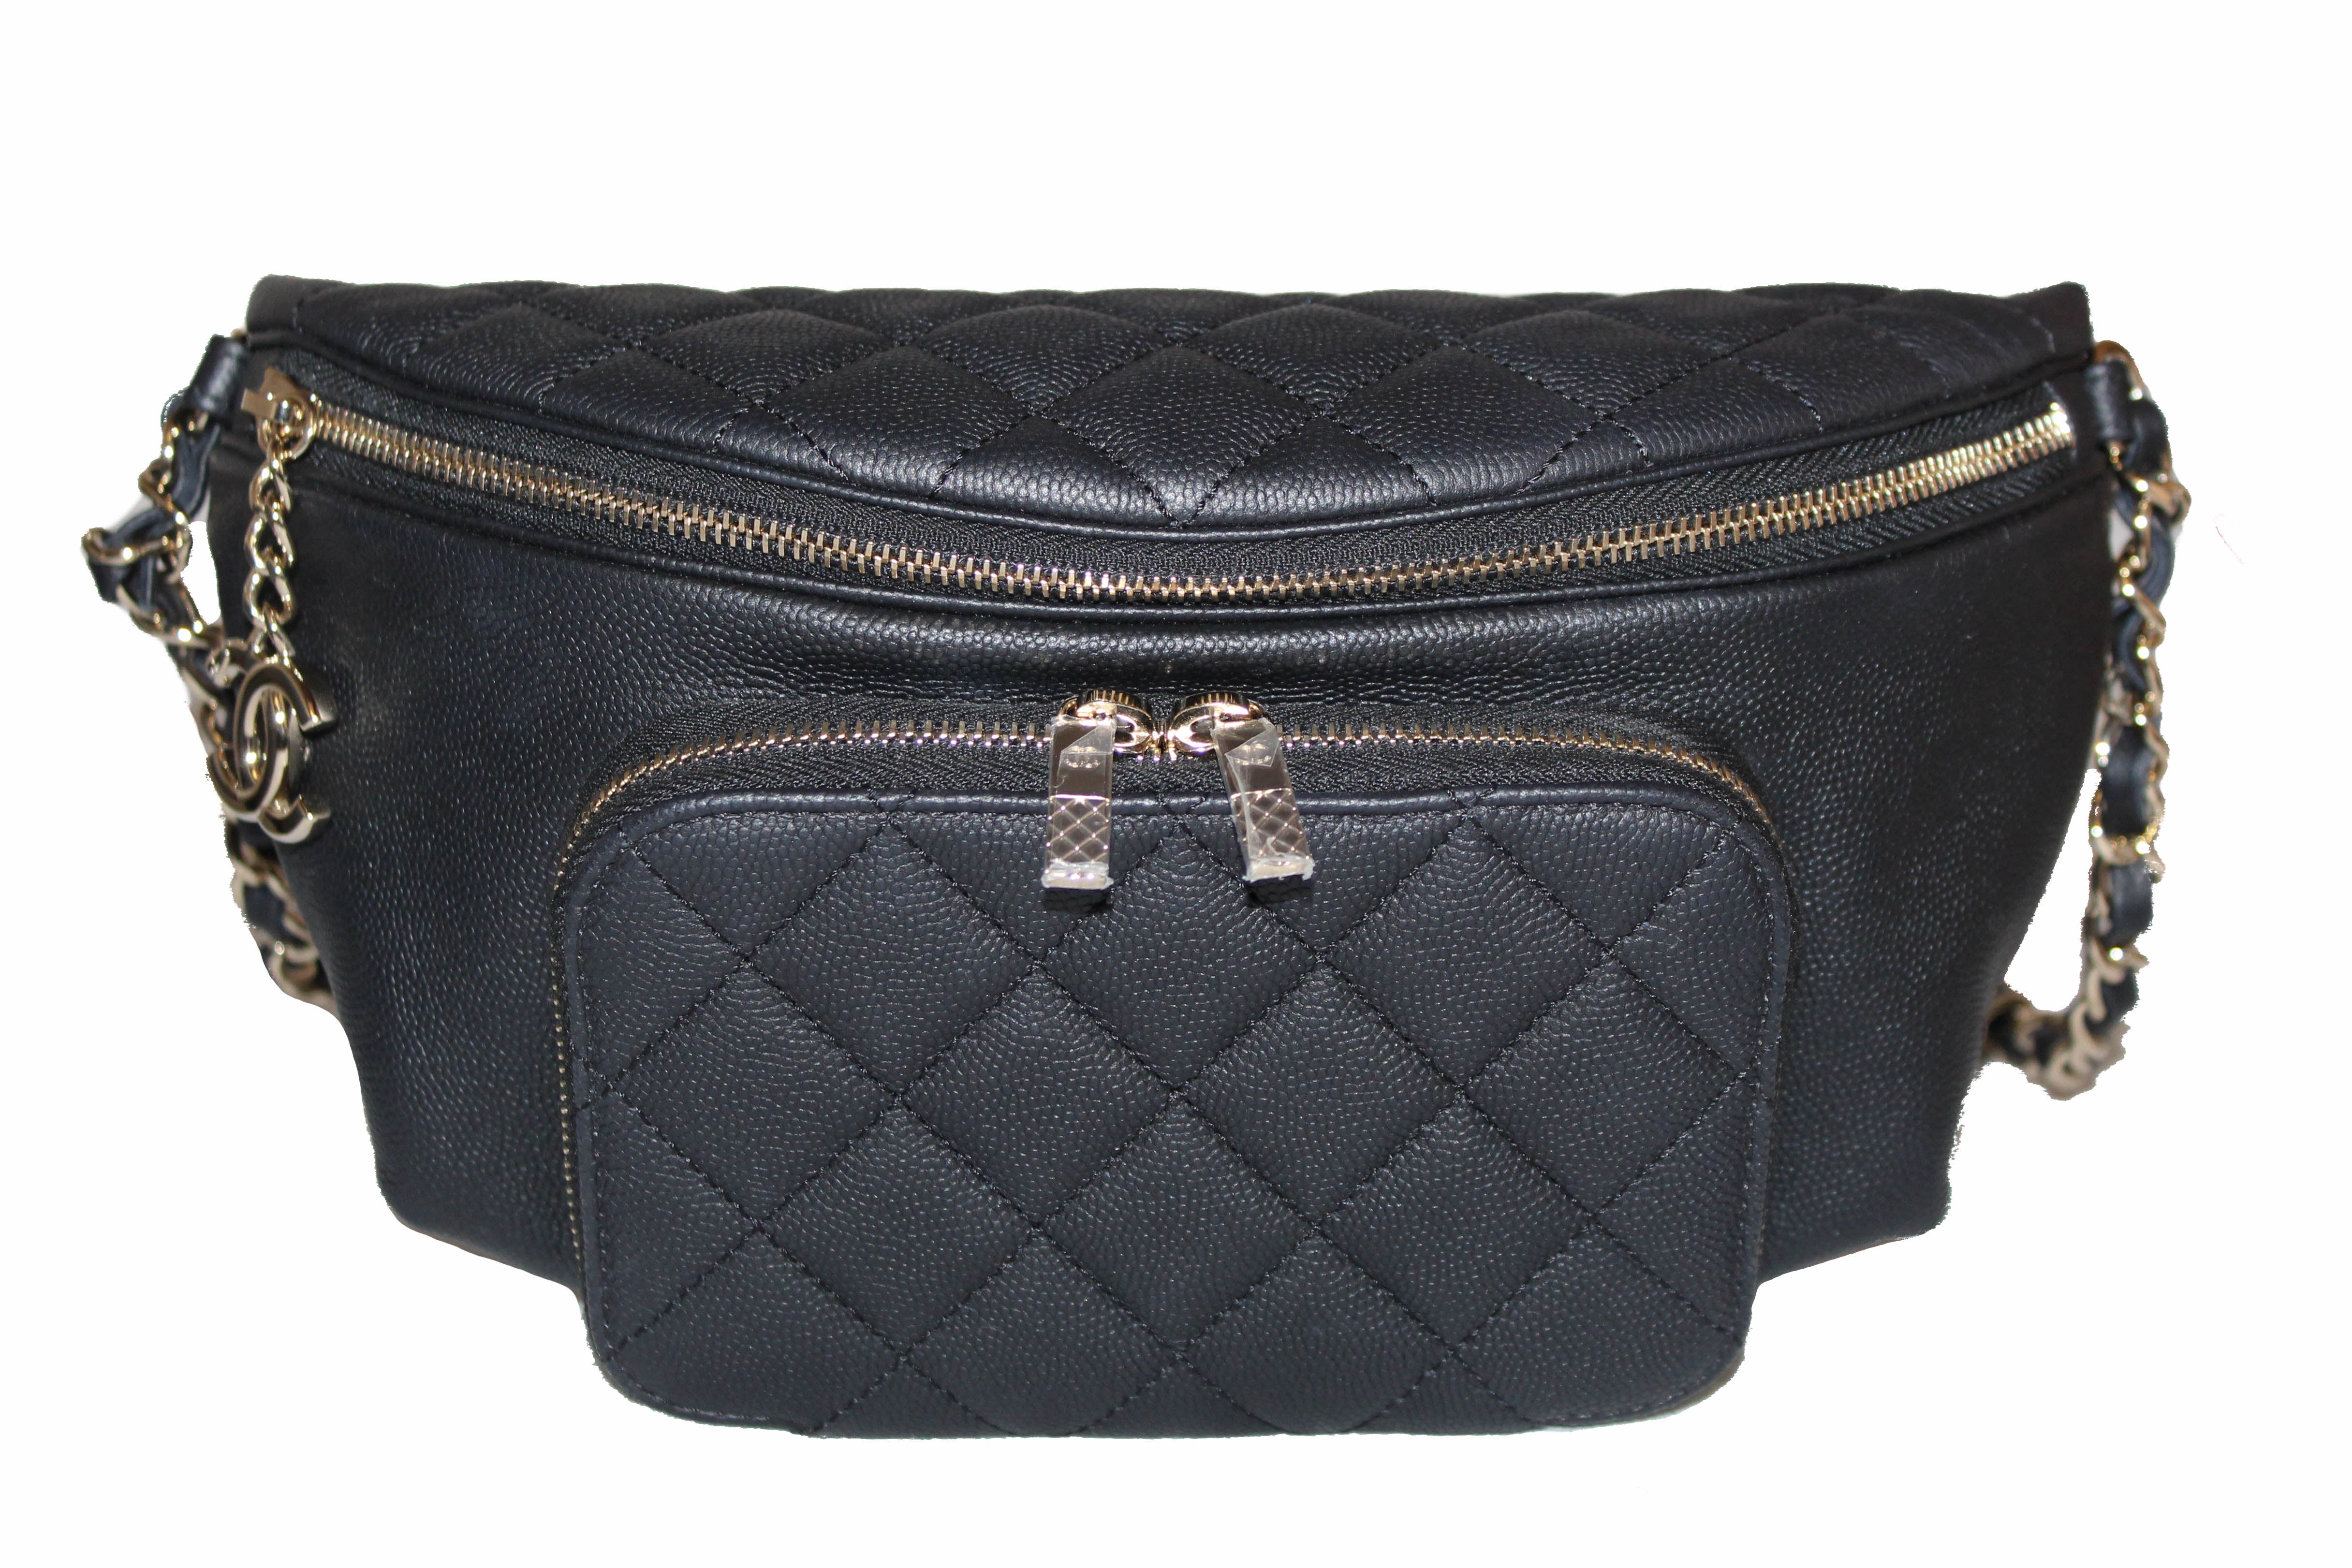 Authentic Chanel Black Small Quilted Caviar Leather Business